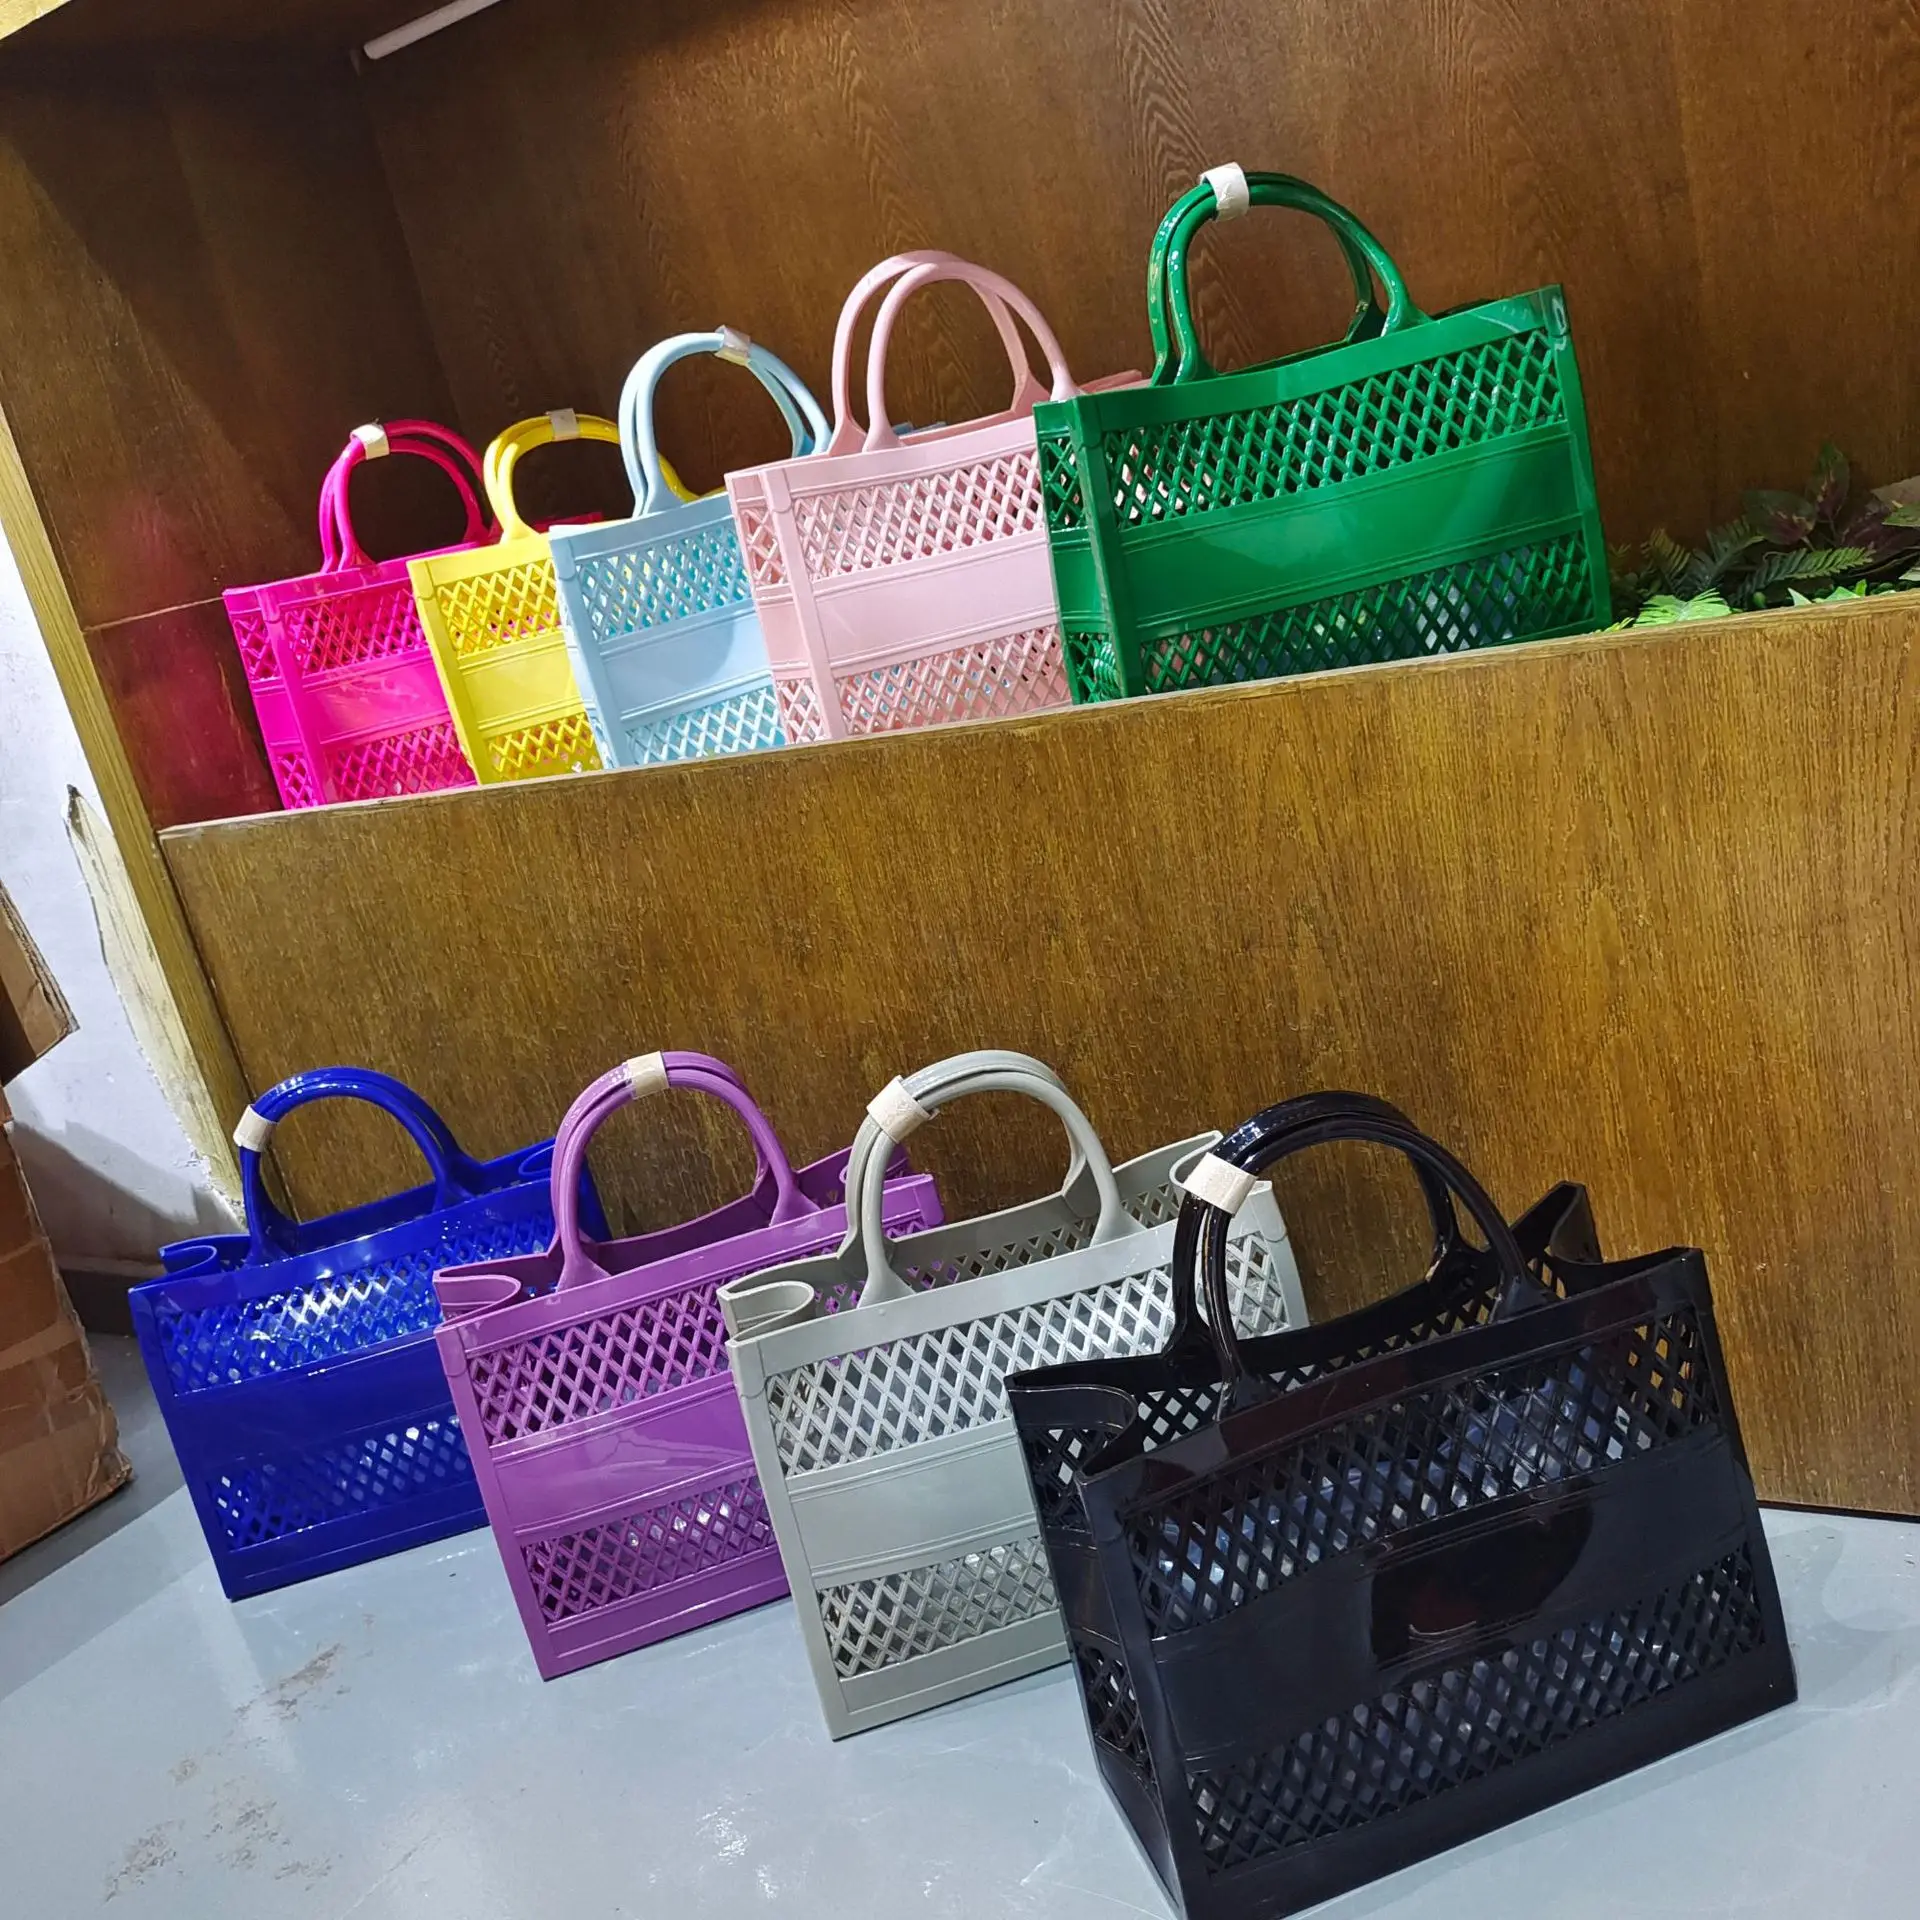 

FANLOSN 2022 Summer Large-capacity New Jelly Shopping Bag Hollow Beach Bag women tote bag, As the picture shown or you could customize the color you want